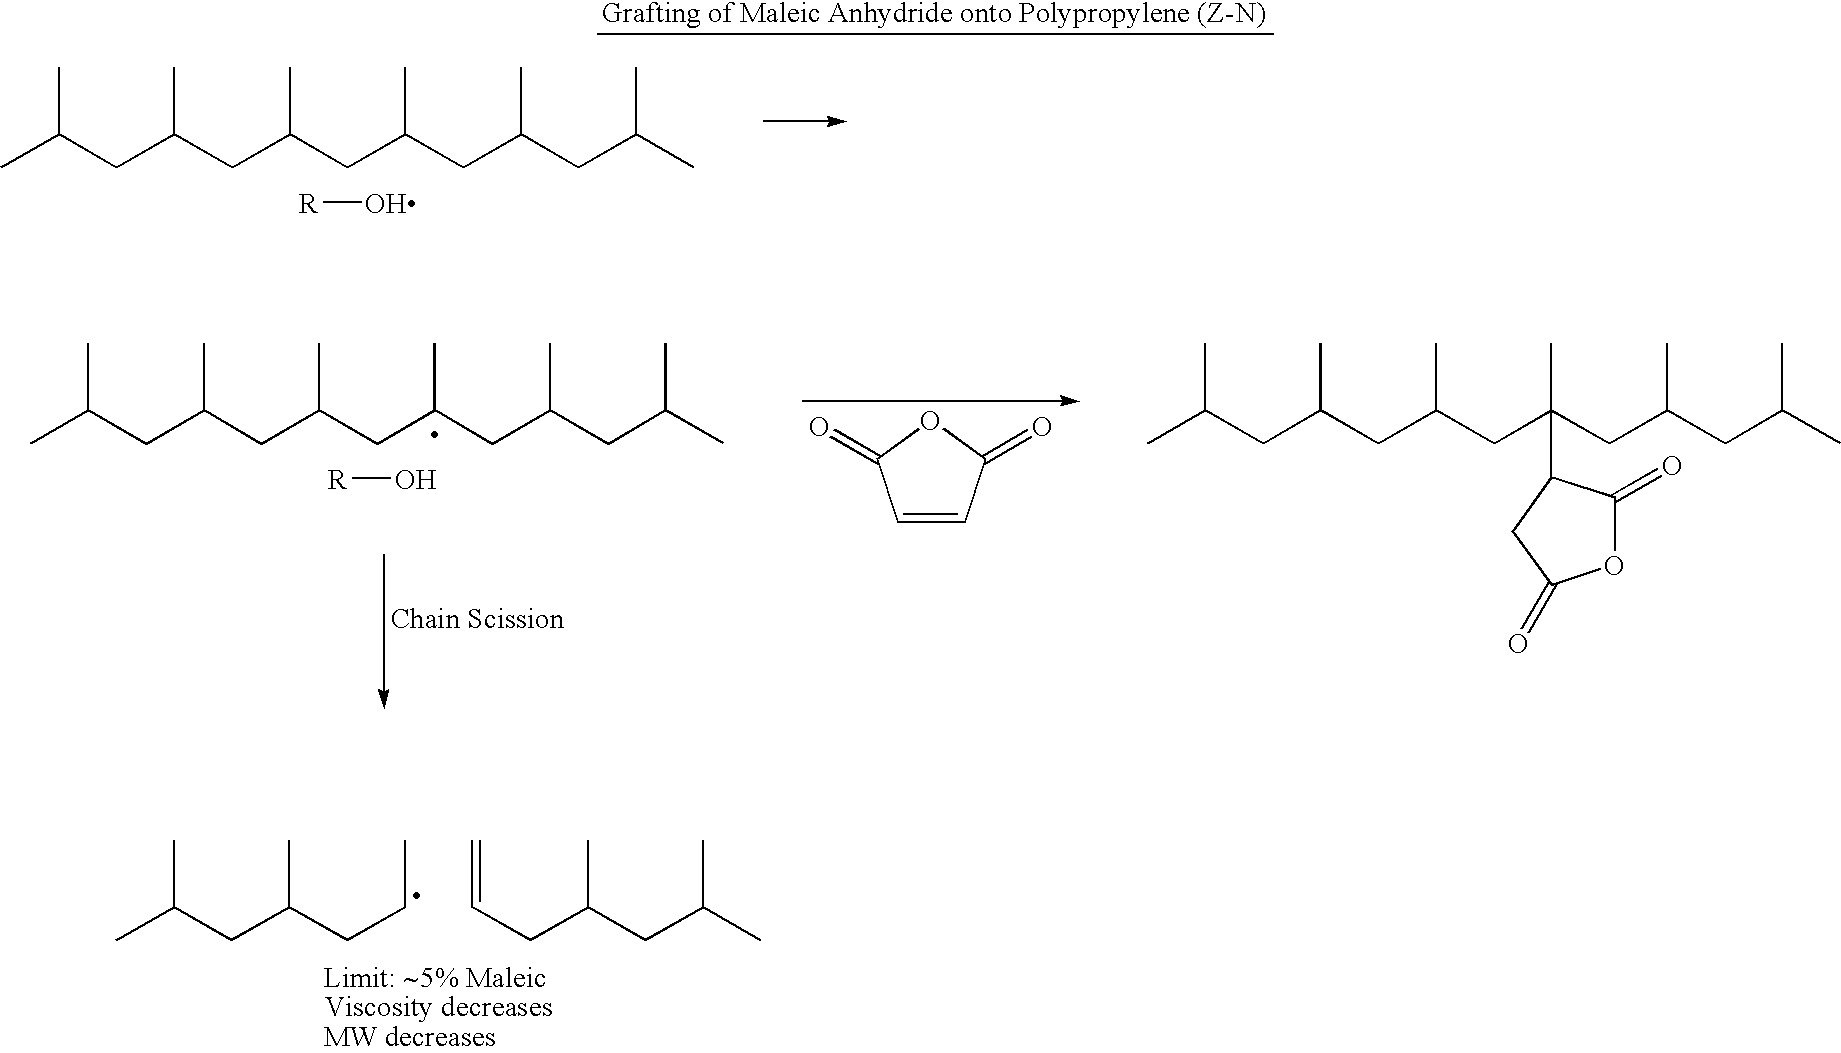 Polypropylene having a high maleic anhydride content